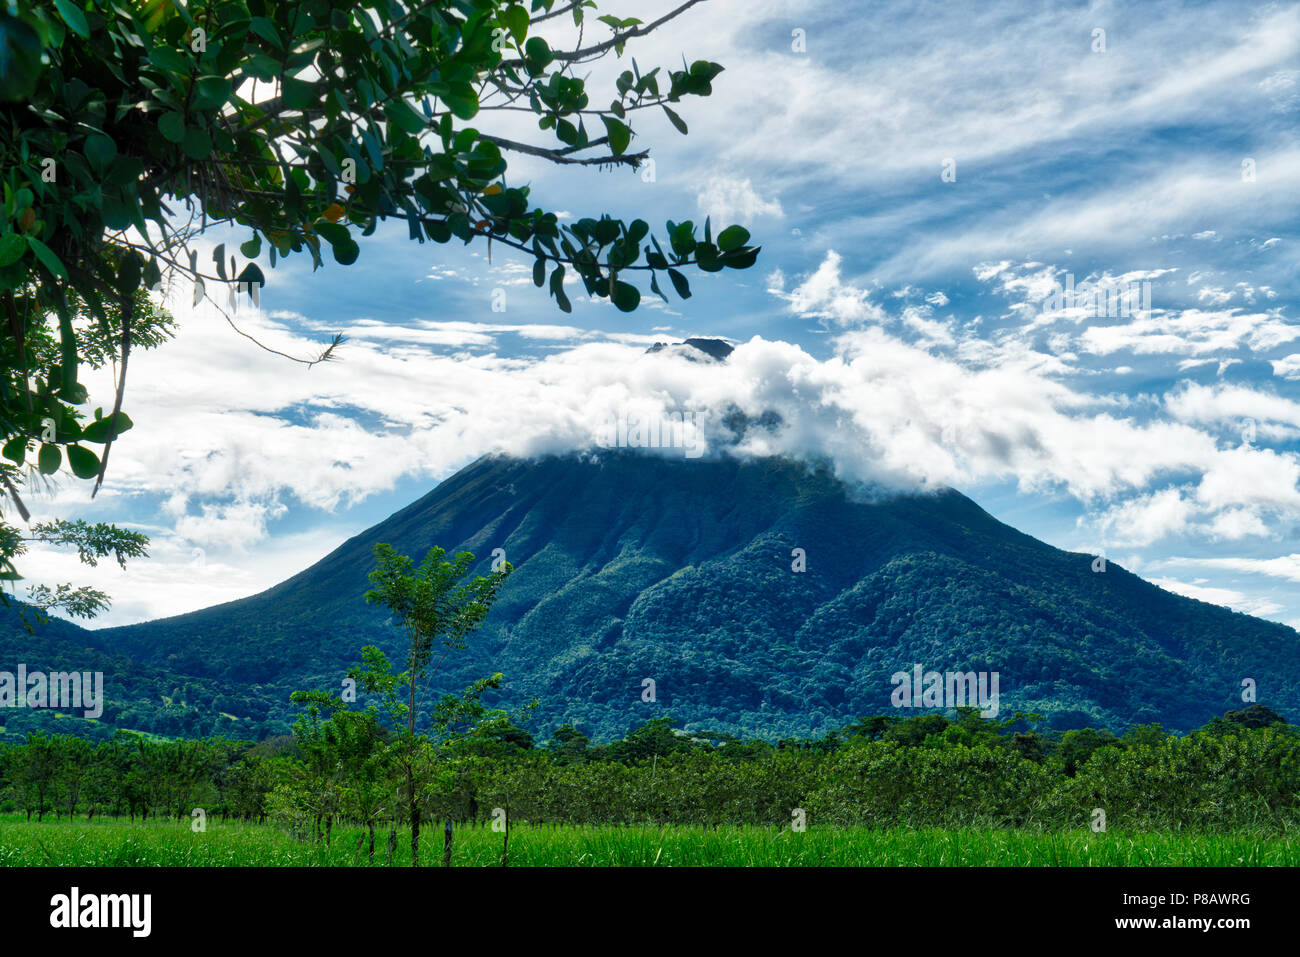 Arenal Volcano is a stratovolcano in Costa Rica with a very typical conical form. It was dormant for several hundred years, but then active 1968-2010. Stock Photo